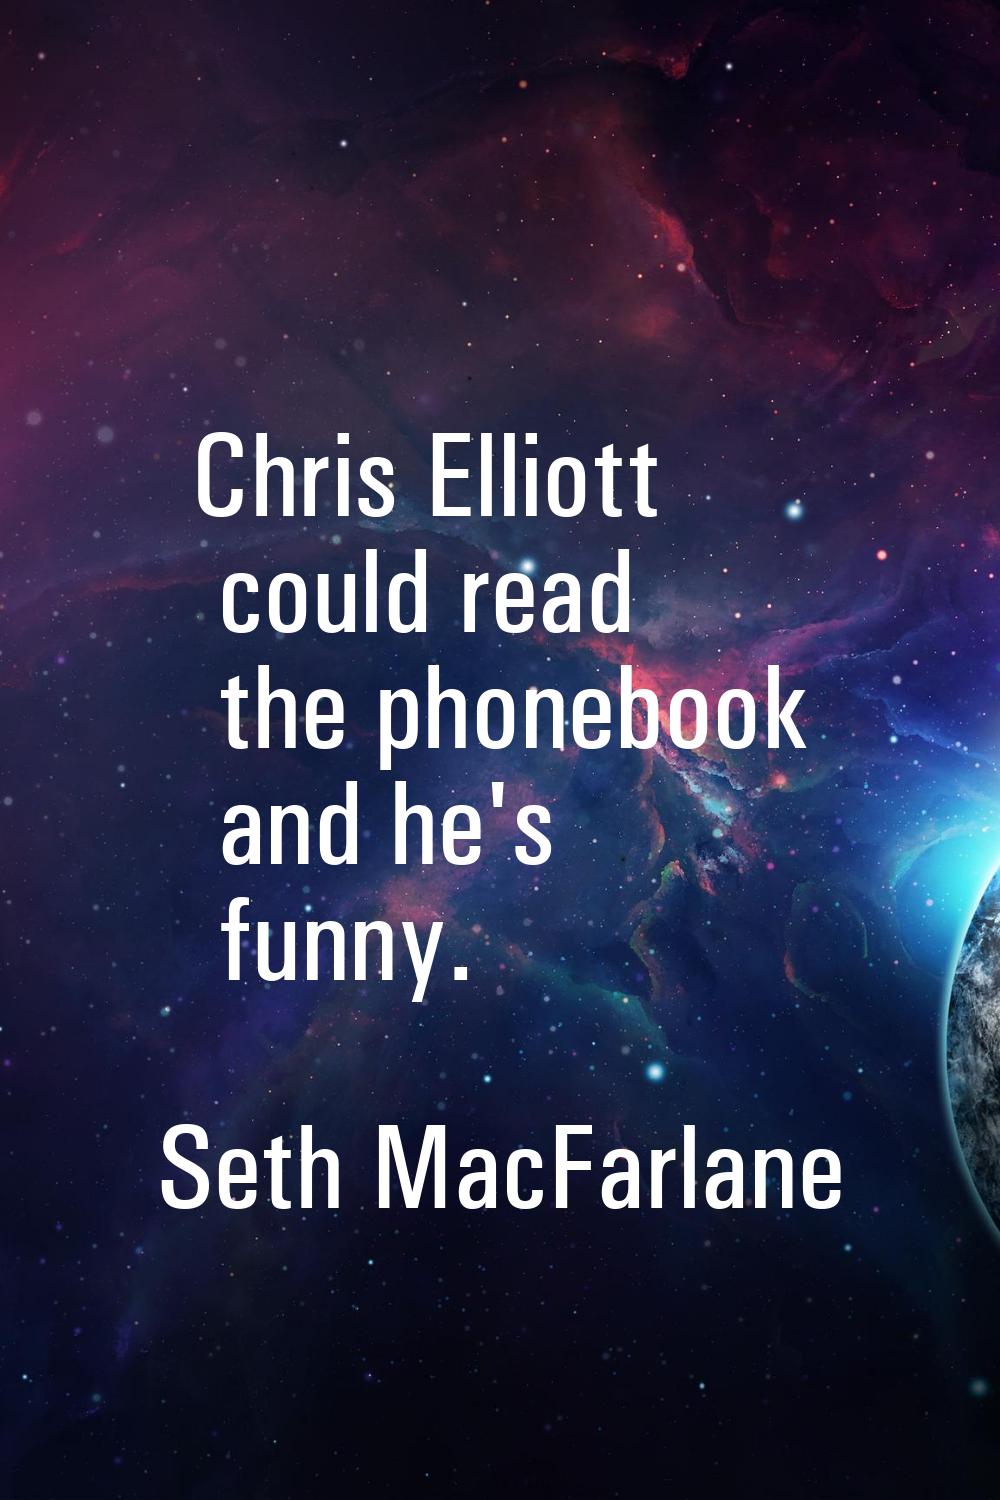 Chris Elliott could read the phonebook and he's funny.